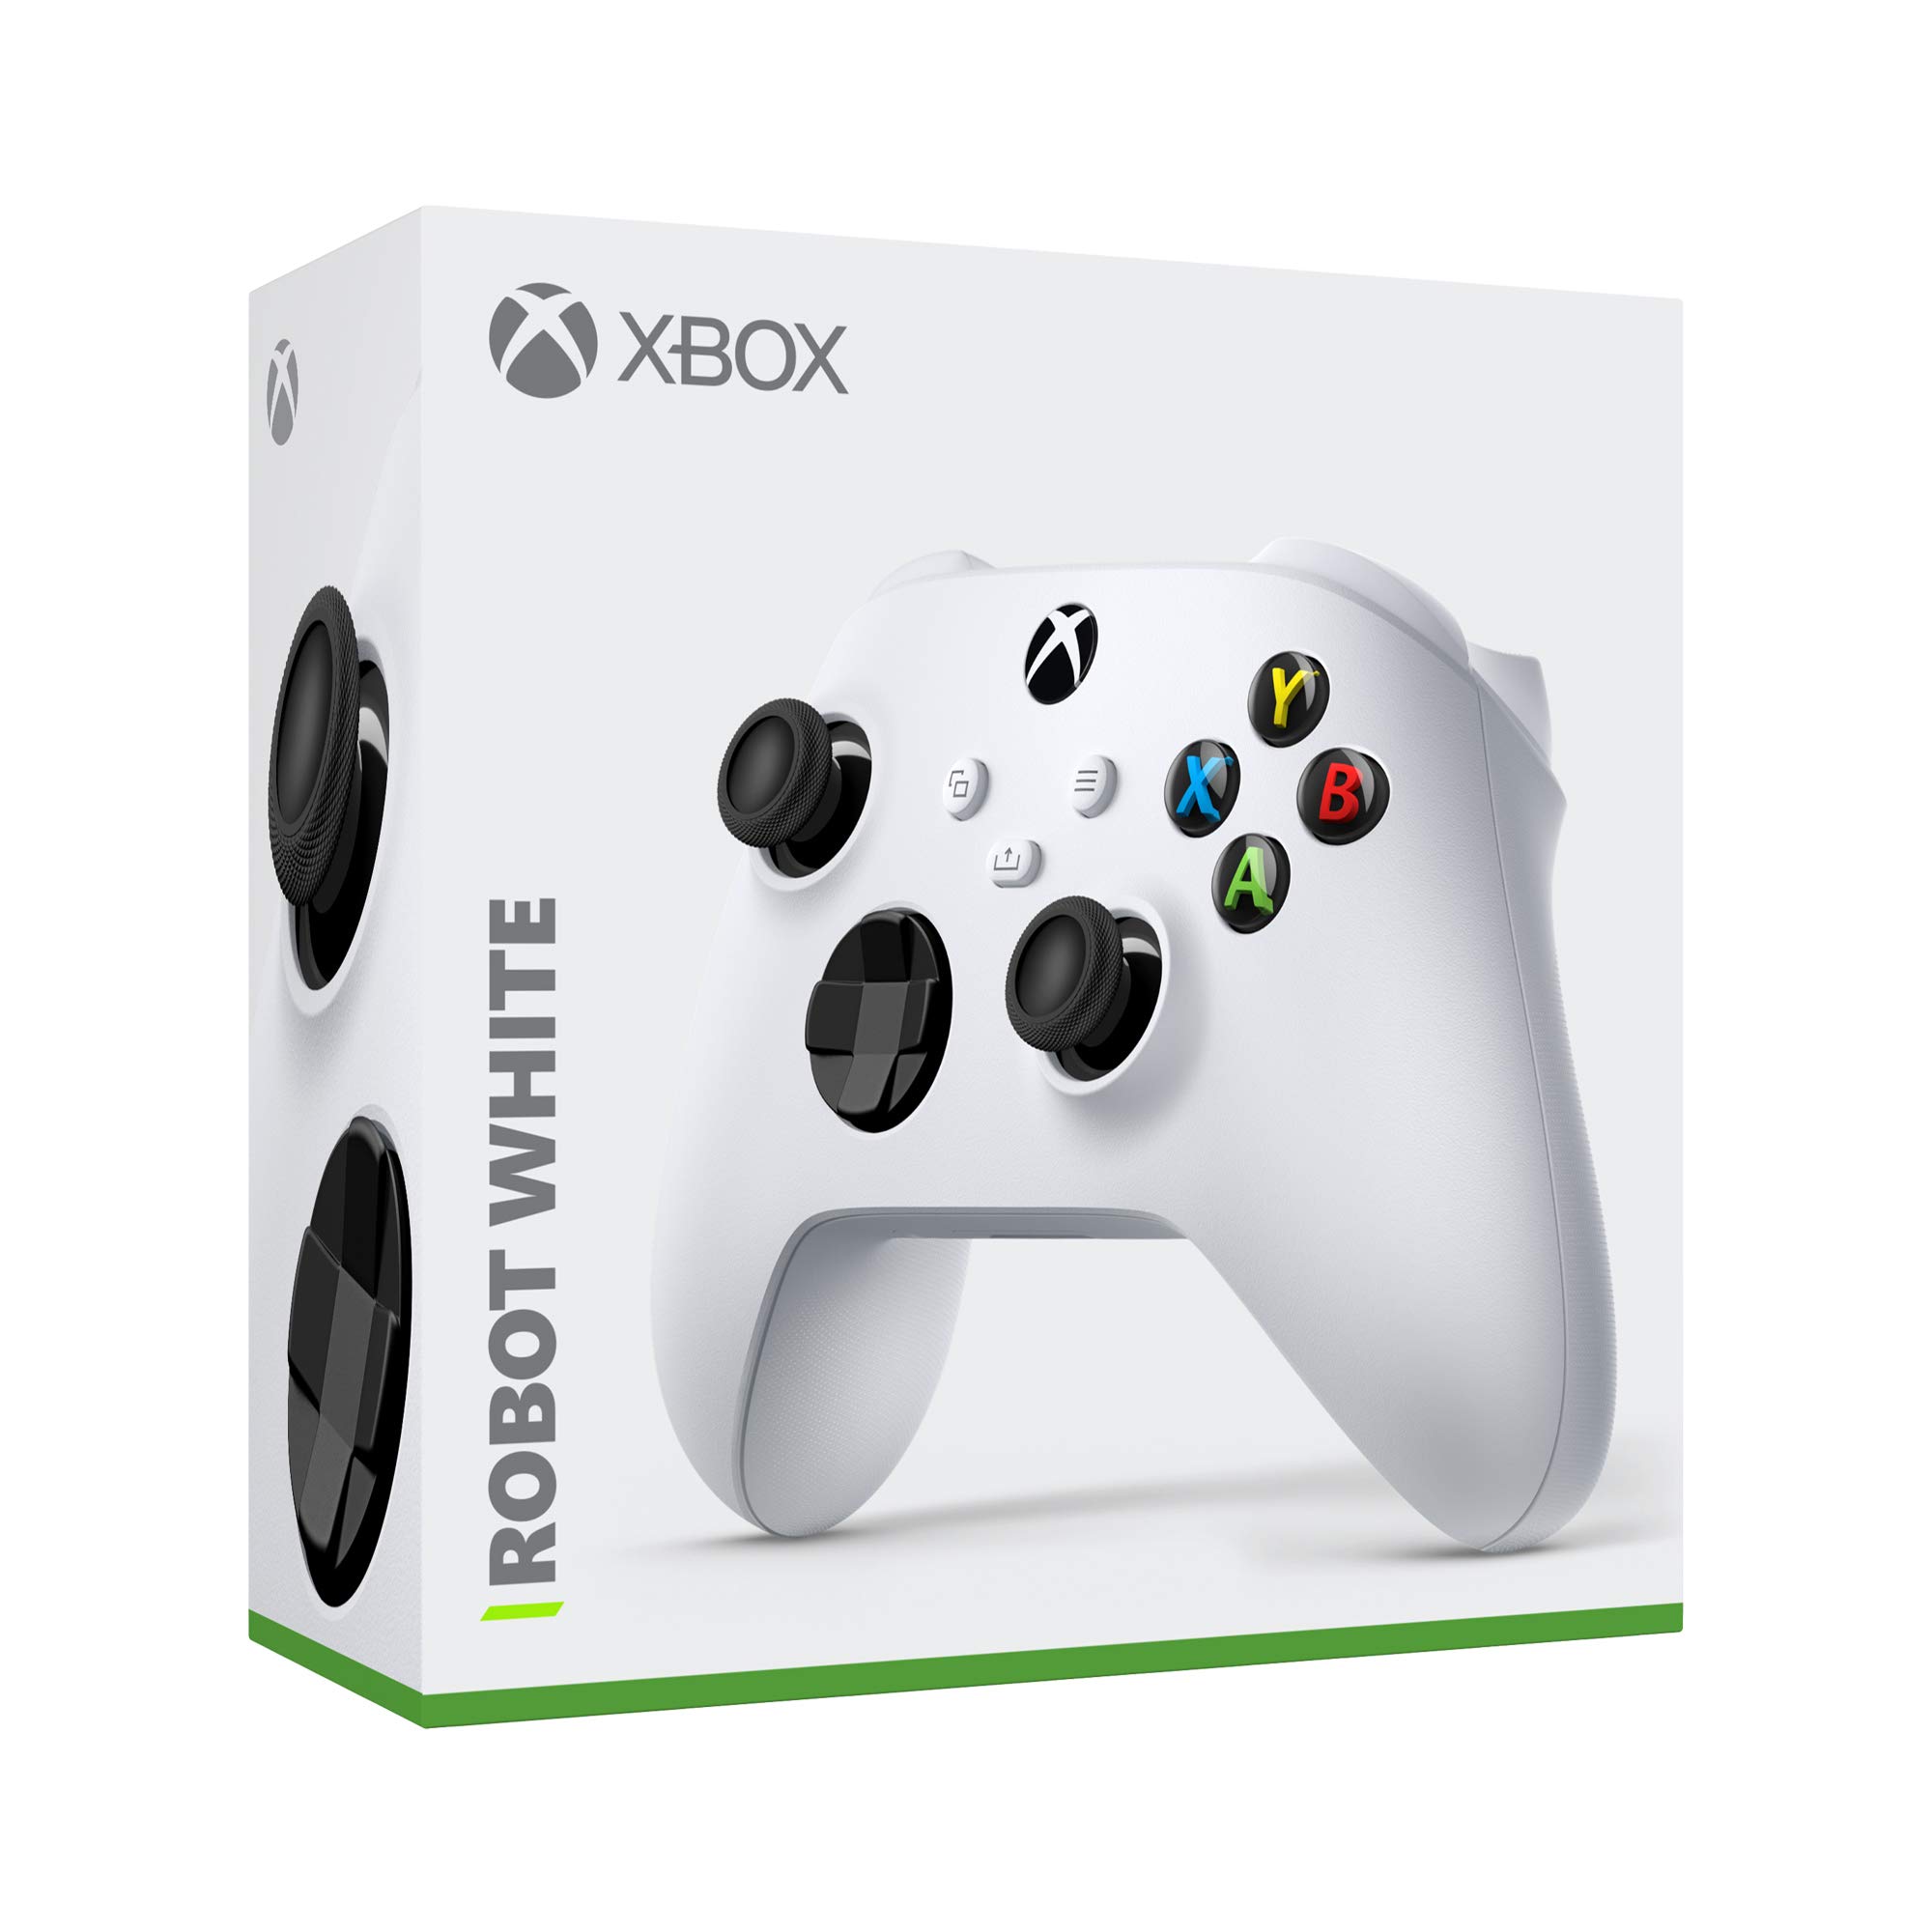 Microsoft Xbox Wireless Controller Robot White - Wireless & Bluetooth Connectivity - New Hybrid D-pad - New Share Button - Featuring Textured Grip - Easily Pair & Switch Between Devices